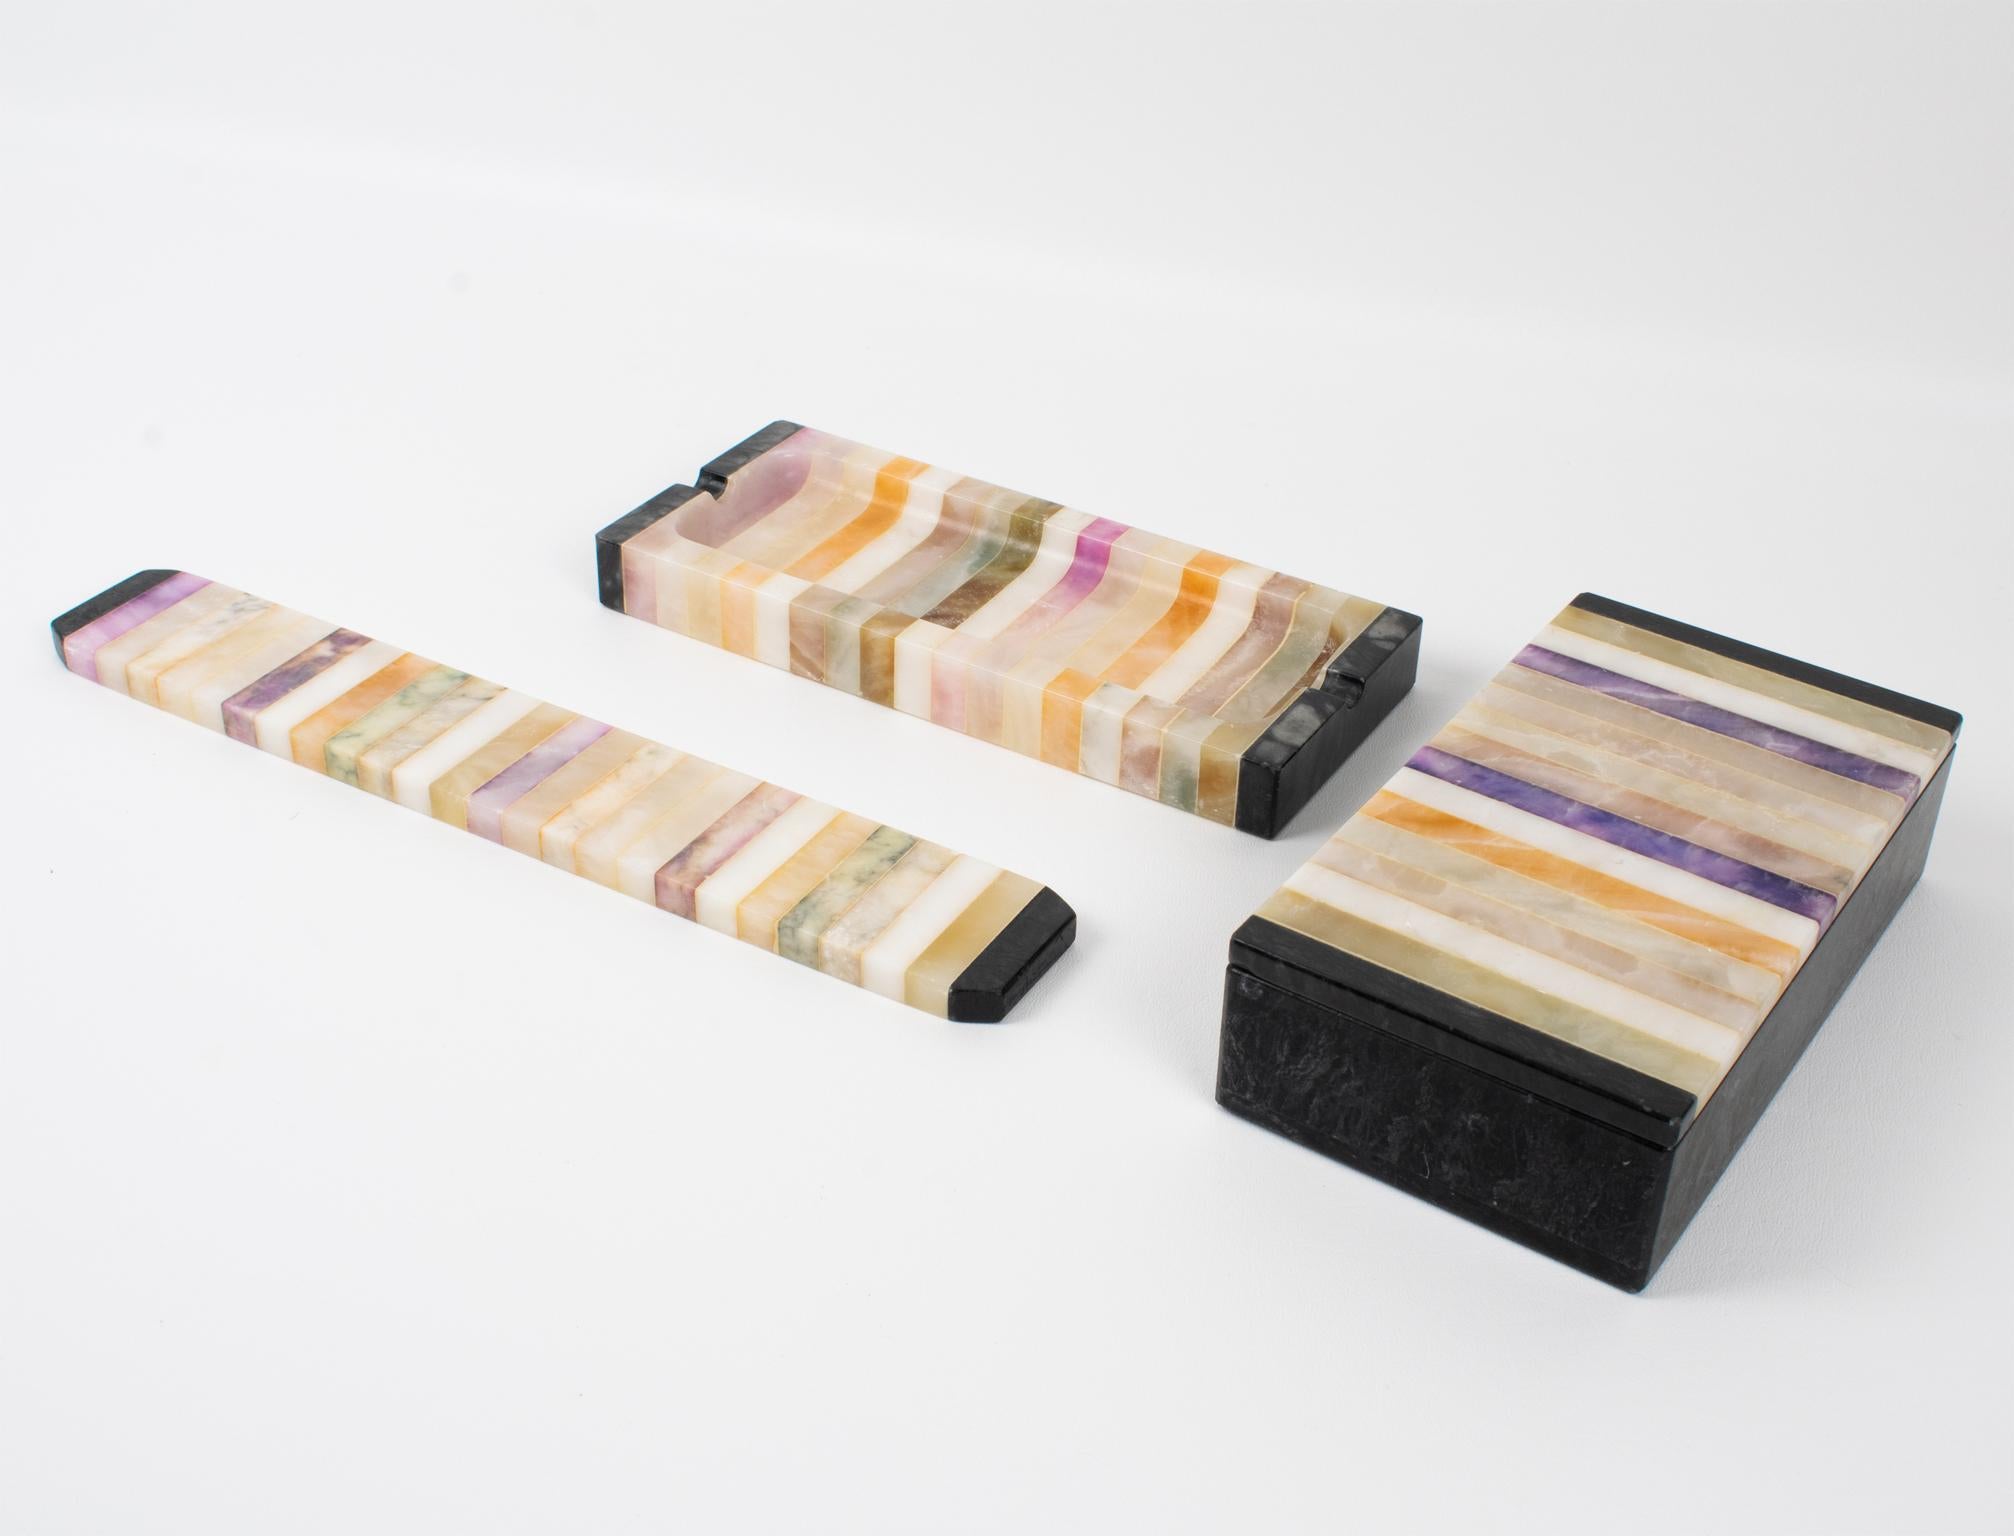 A rare functional 1960s Mid-Century modernist desk accessories set crafted in Italy in the 1960s. The set comprises three pieces: a pen holder, a box, and a ruler. The refined shape boasts marble and onyx stone geometric marquetry on each piece.